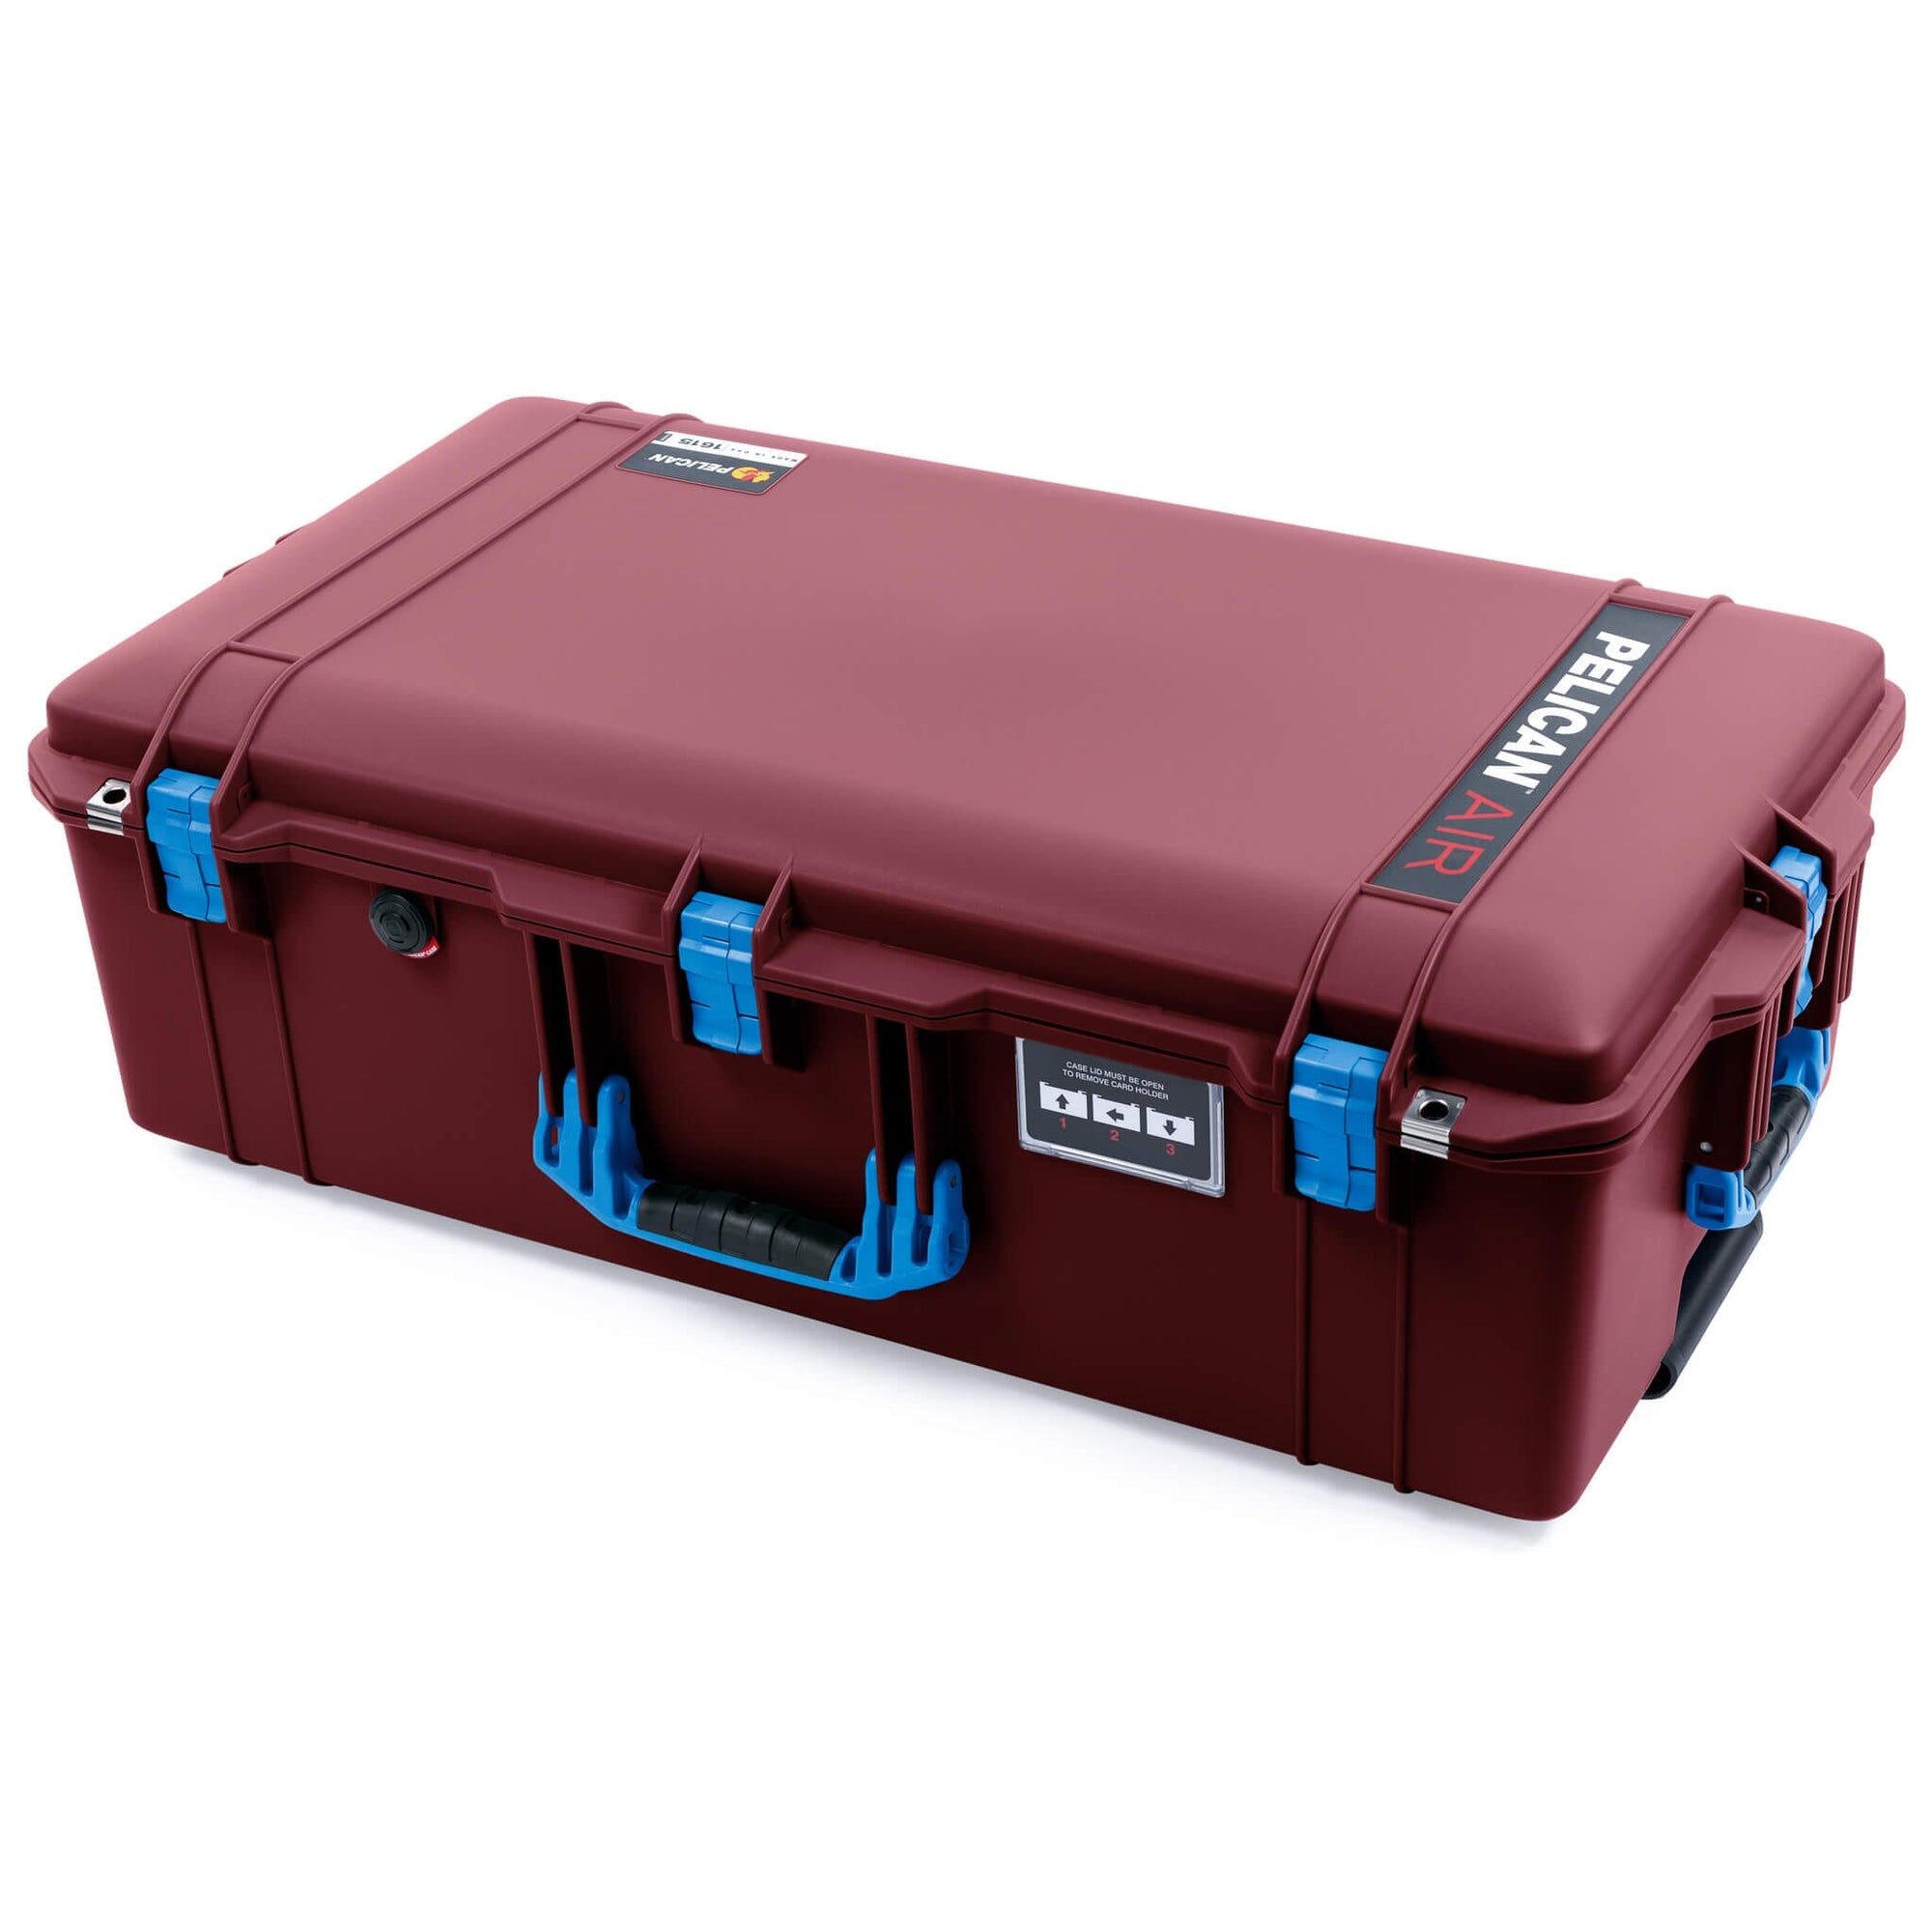 Pelican 1615 Air Case, Oxblood with Blue Handles & Latches ColorCase 